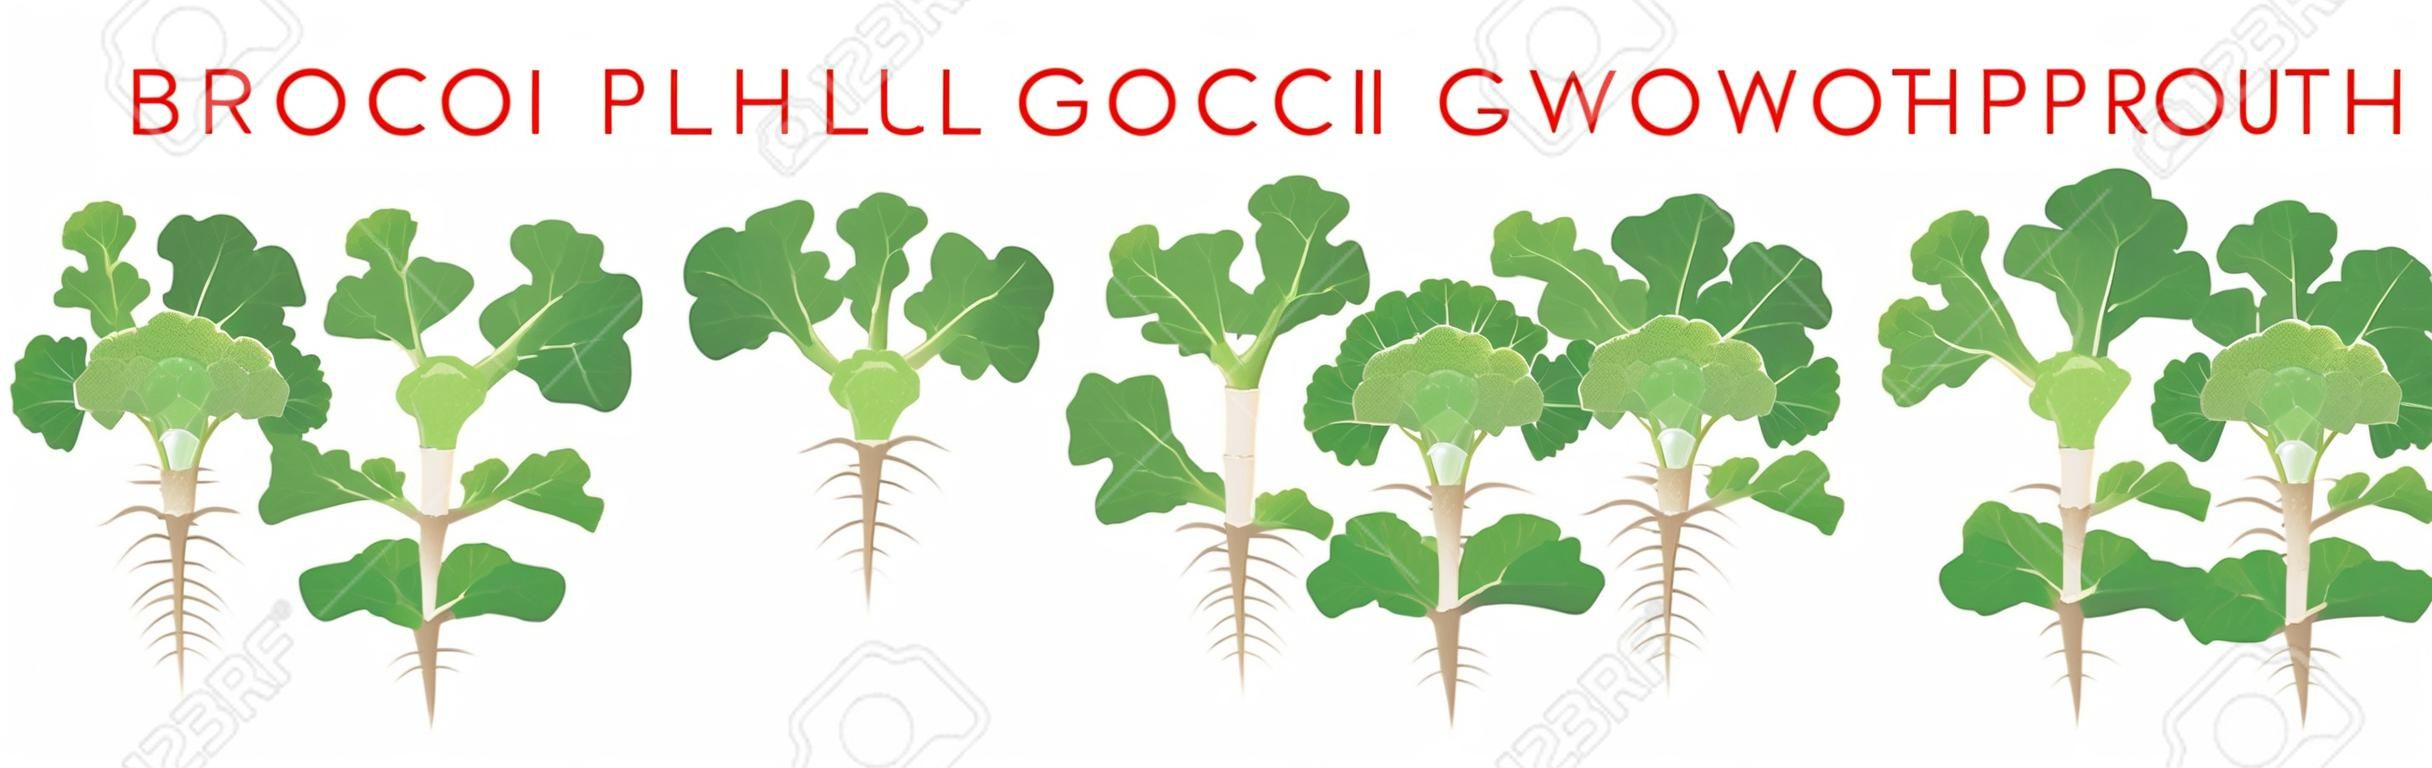 Broccoli plant growth stages infographic elements. Growing process of broccoli from seeds, sprout to mature plant with roots, life cycle of plant isolated on white background vector flat illustration